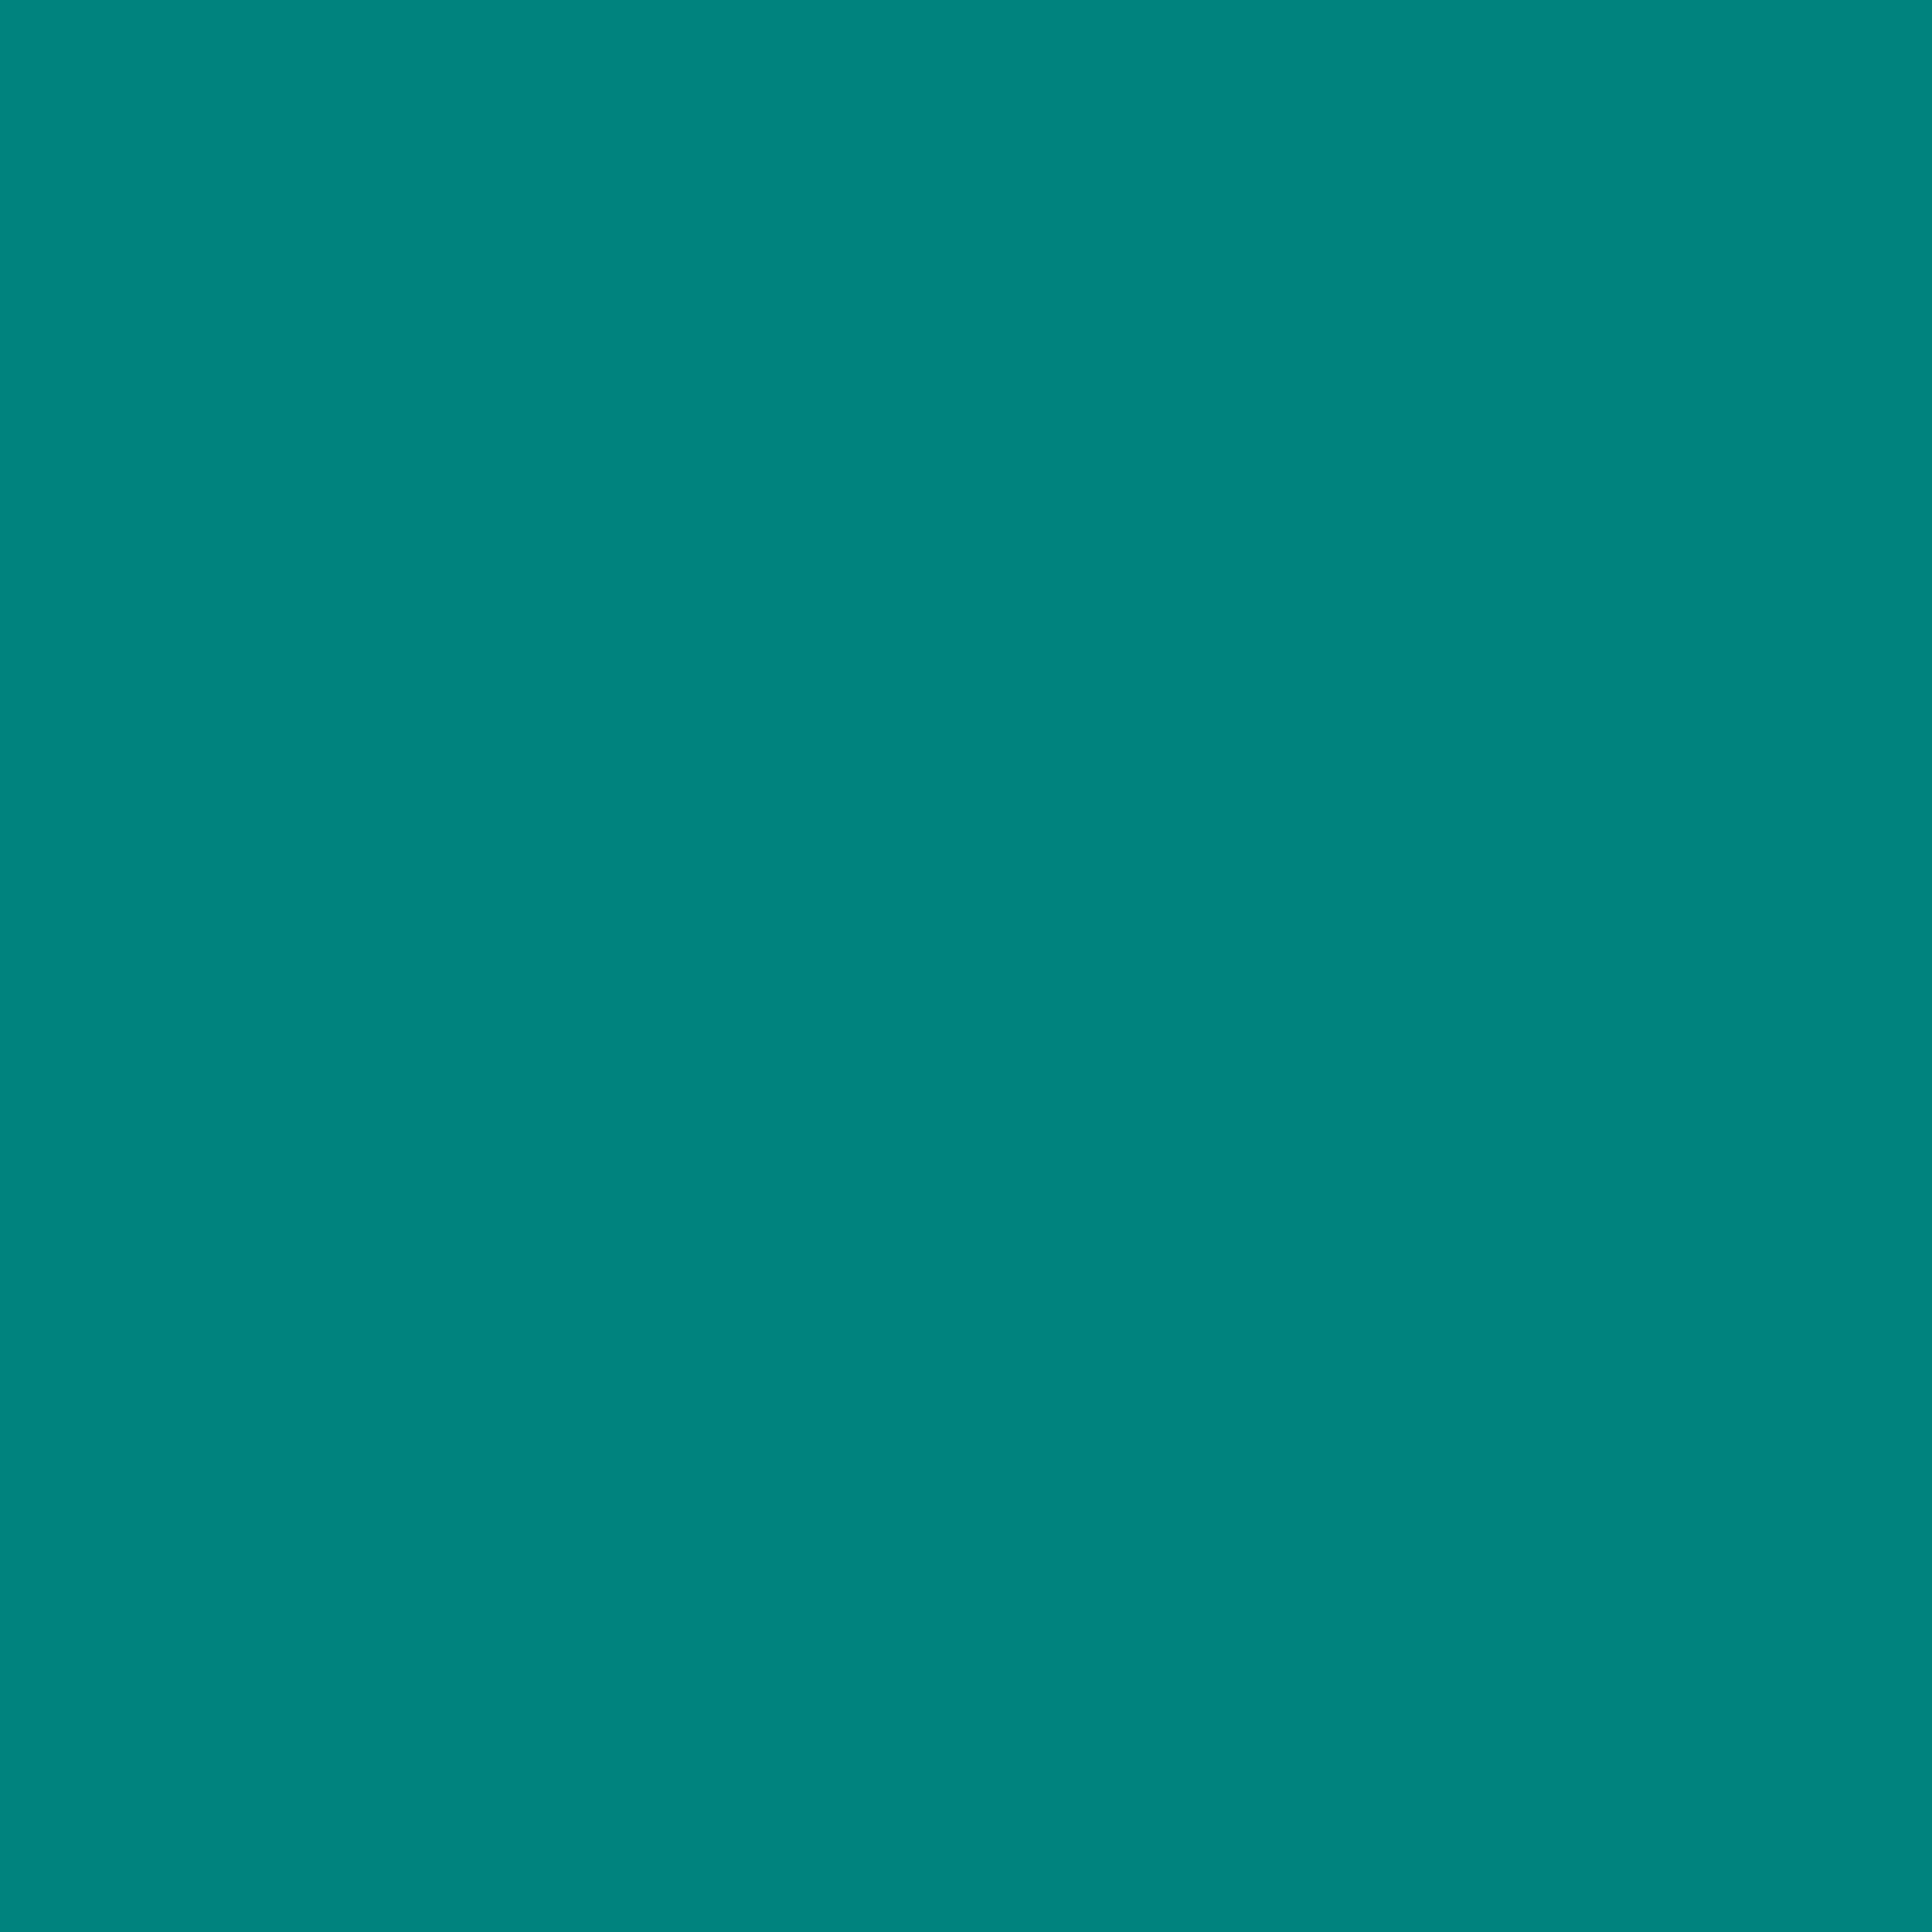 2048x2048 Teal Green Solid Color Background